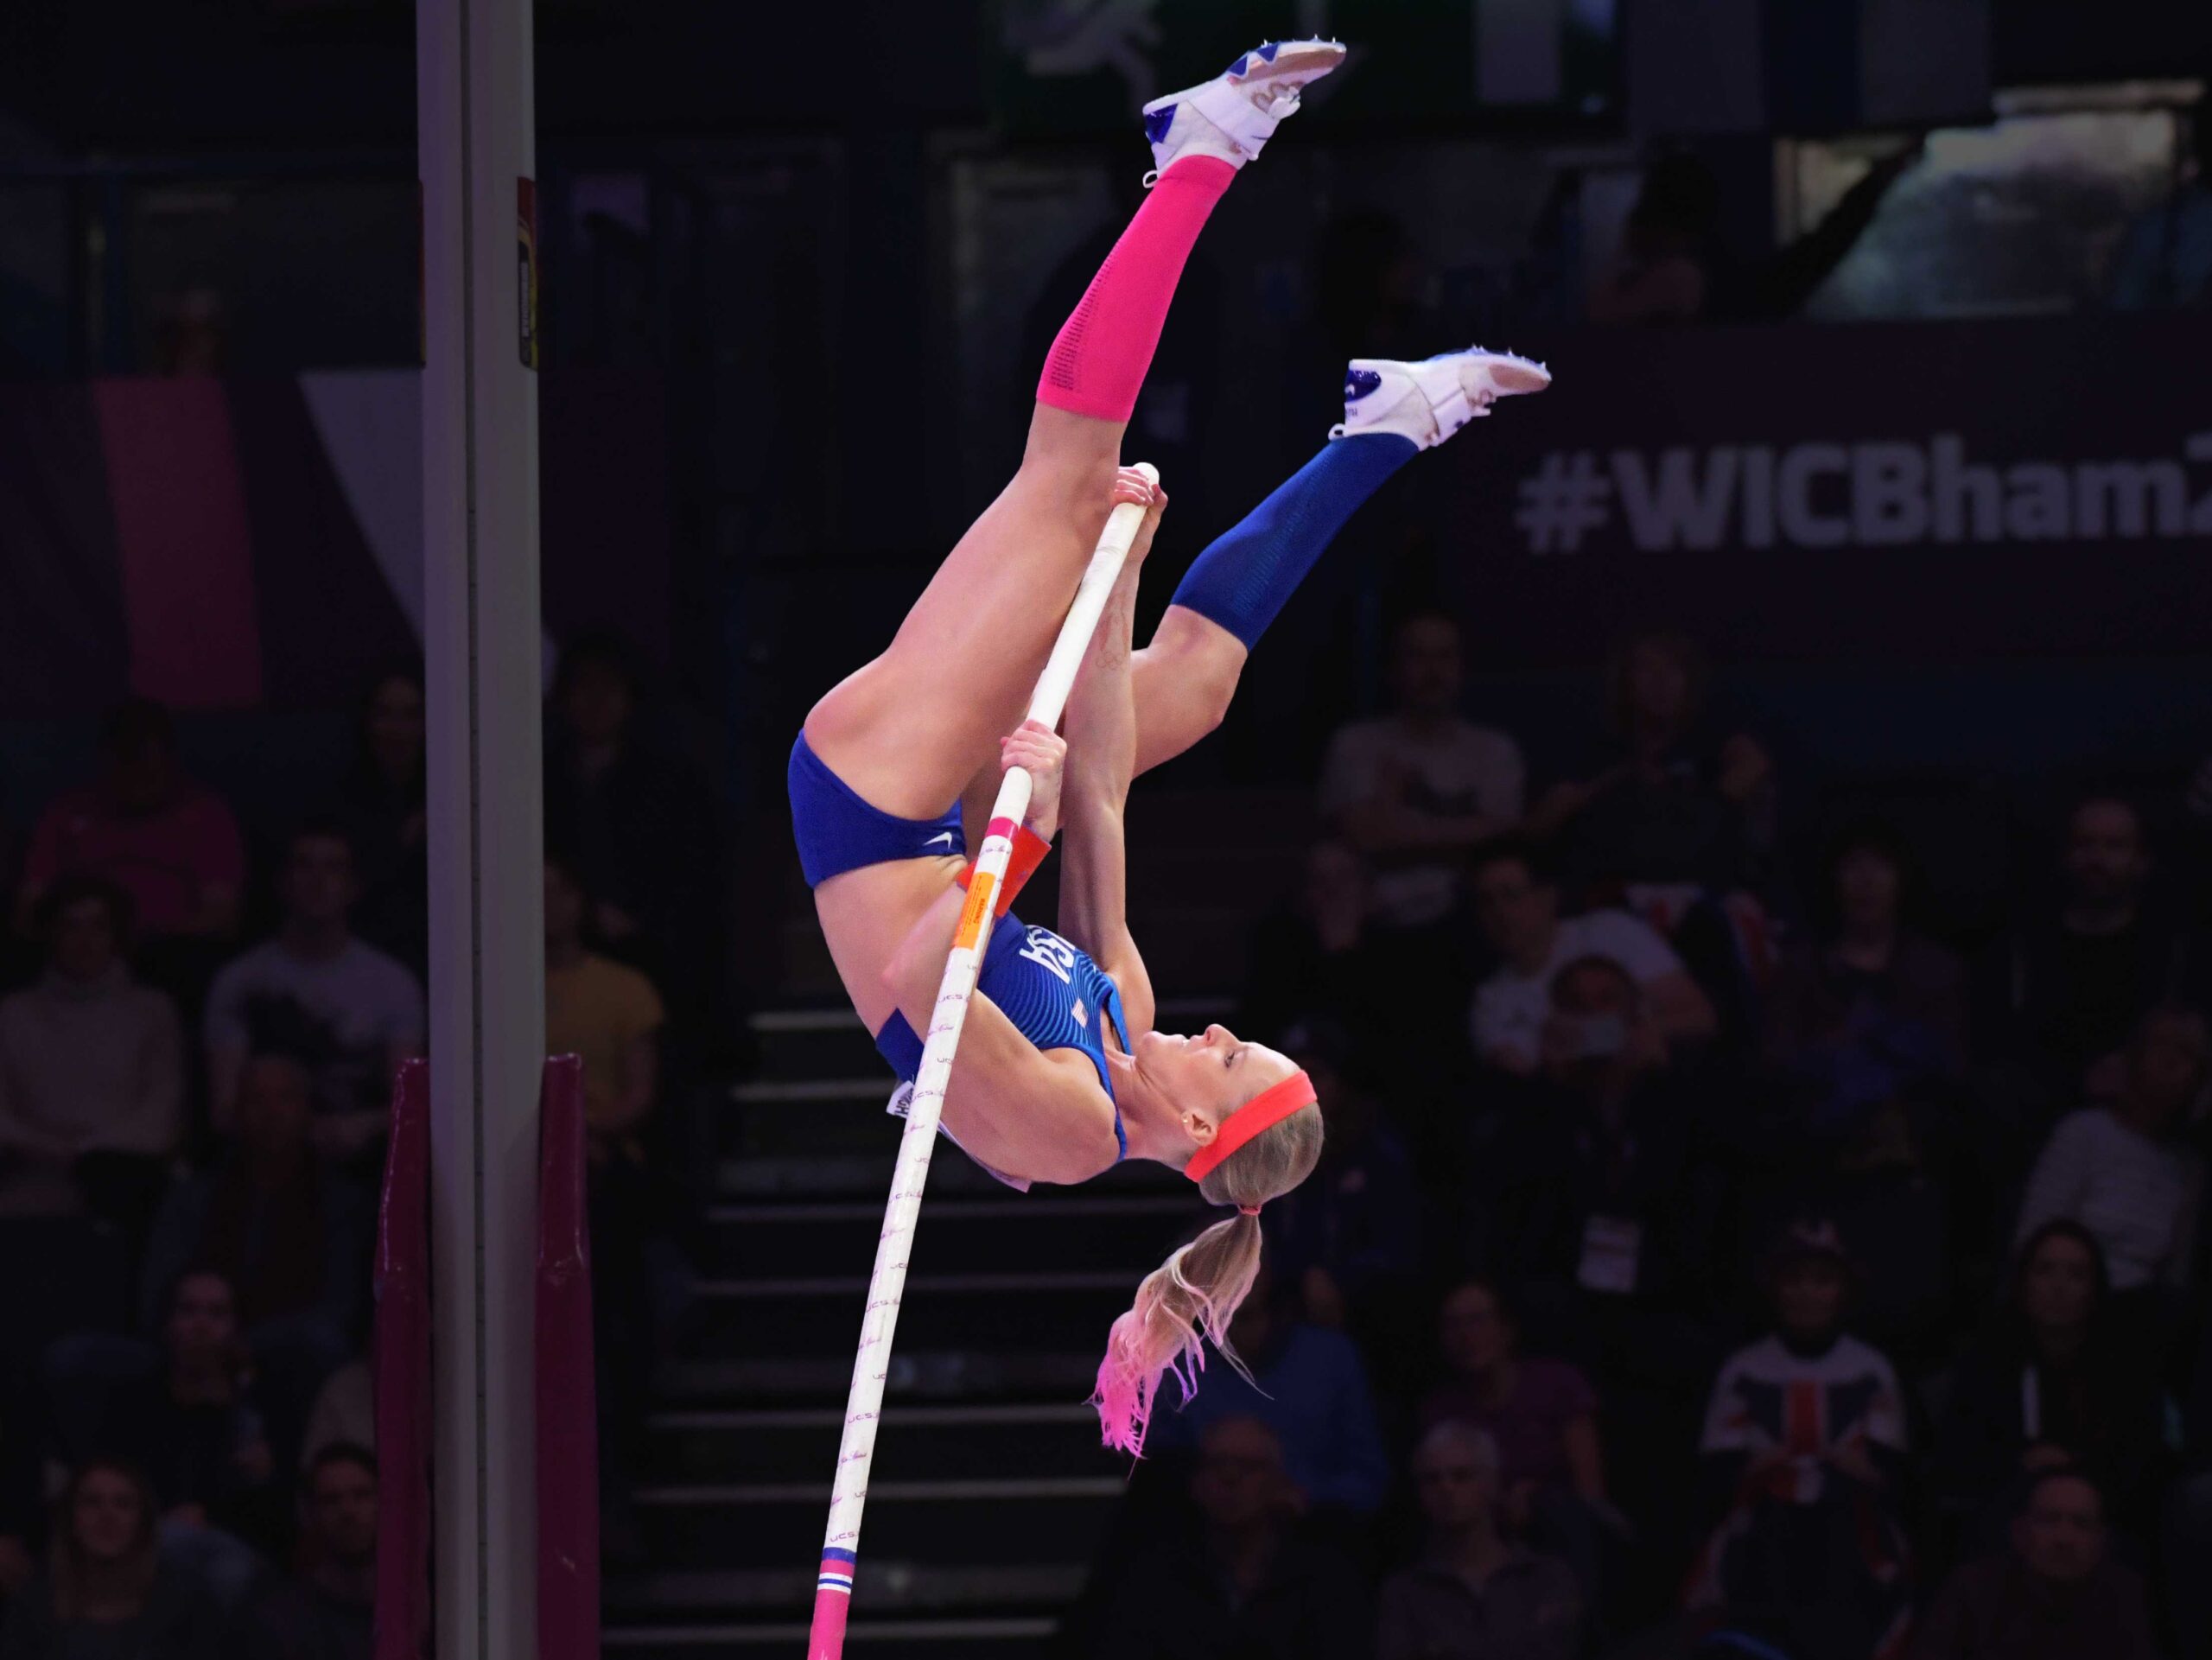 American Record Holder, Pole Vaulting with UCS Spirit Poles at the 2018 IAAF World Championships Indoors.